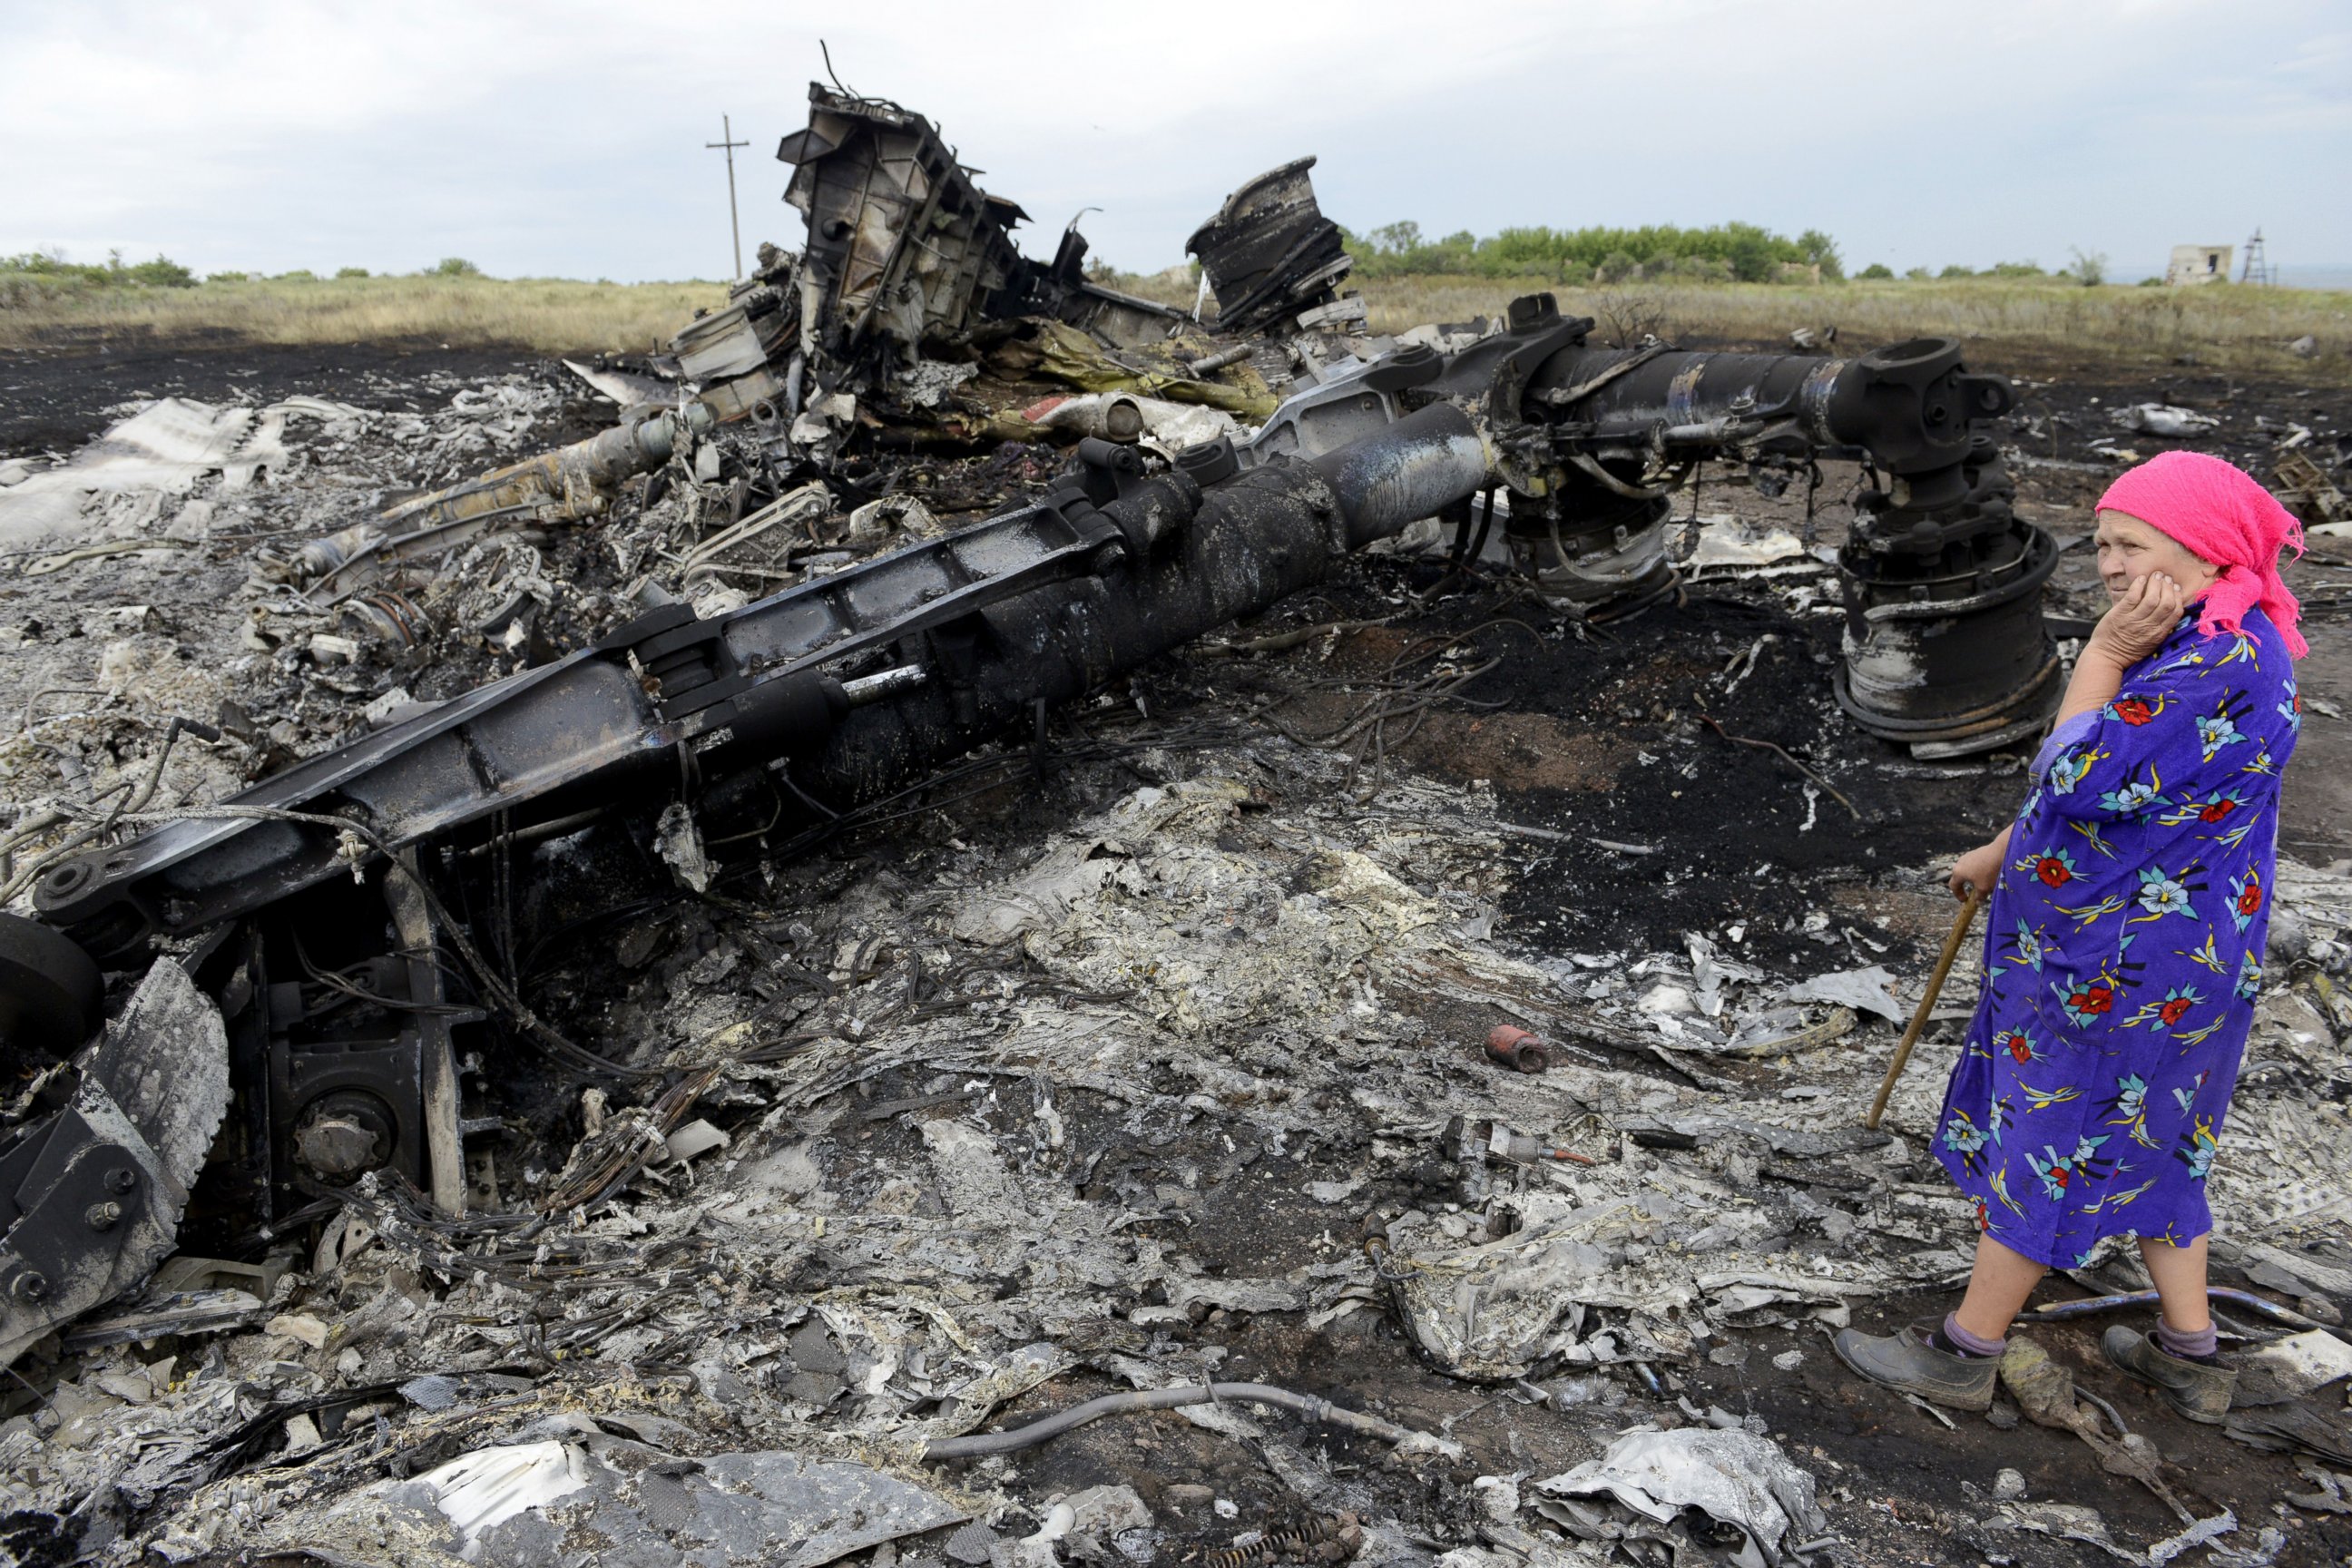 PHOTO: A local resident stands among the wreckage at the site of the crash of a Malaysia Airlines plane carrying 298 people from Amsterdam to Kuala Lumpur in Grabove, in rebel-held east Ukraine, on July 19, 2014.